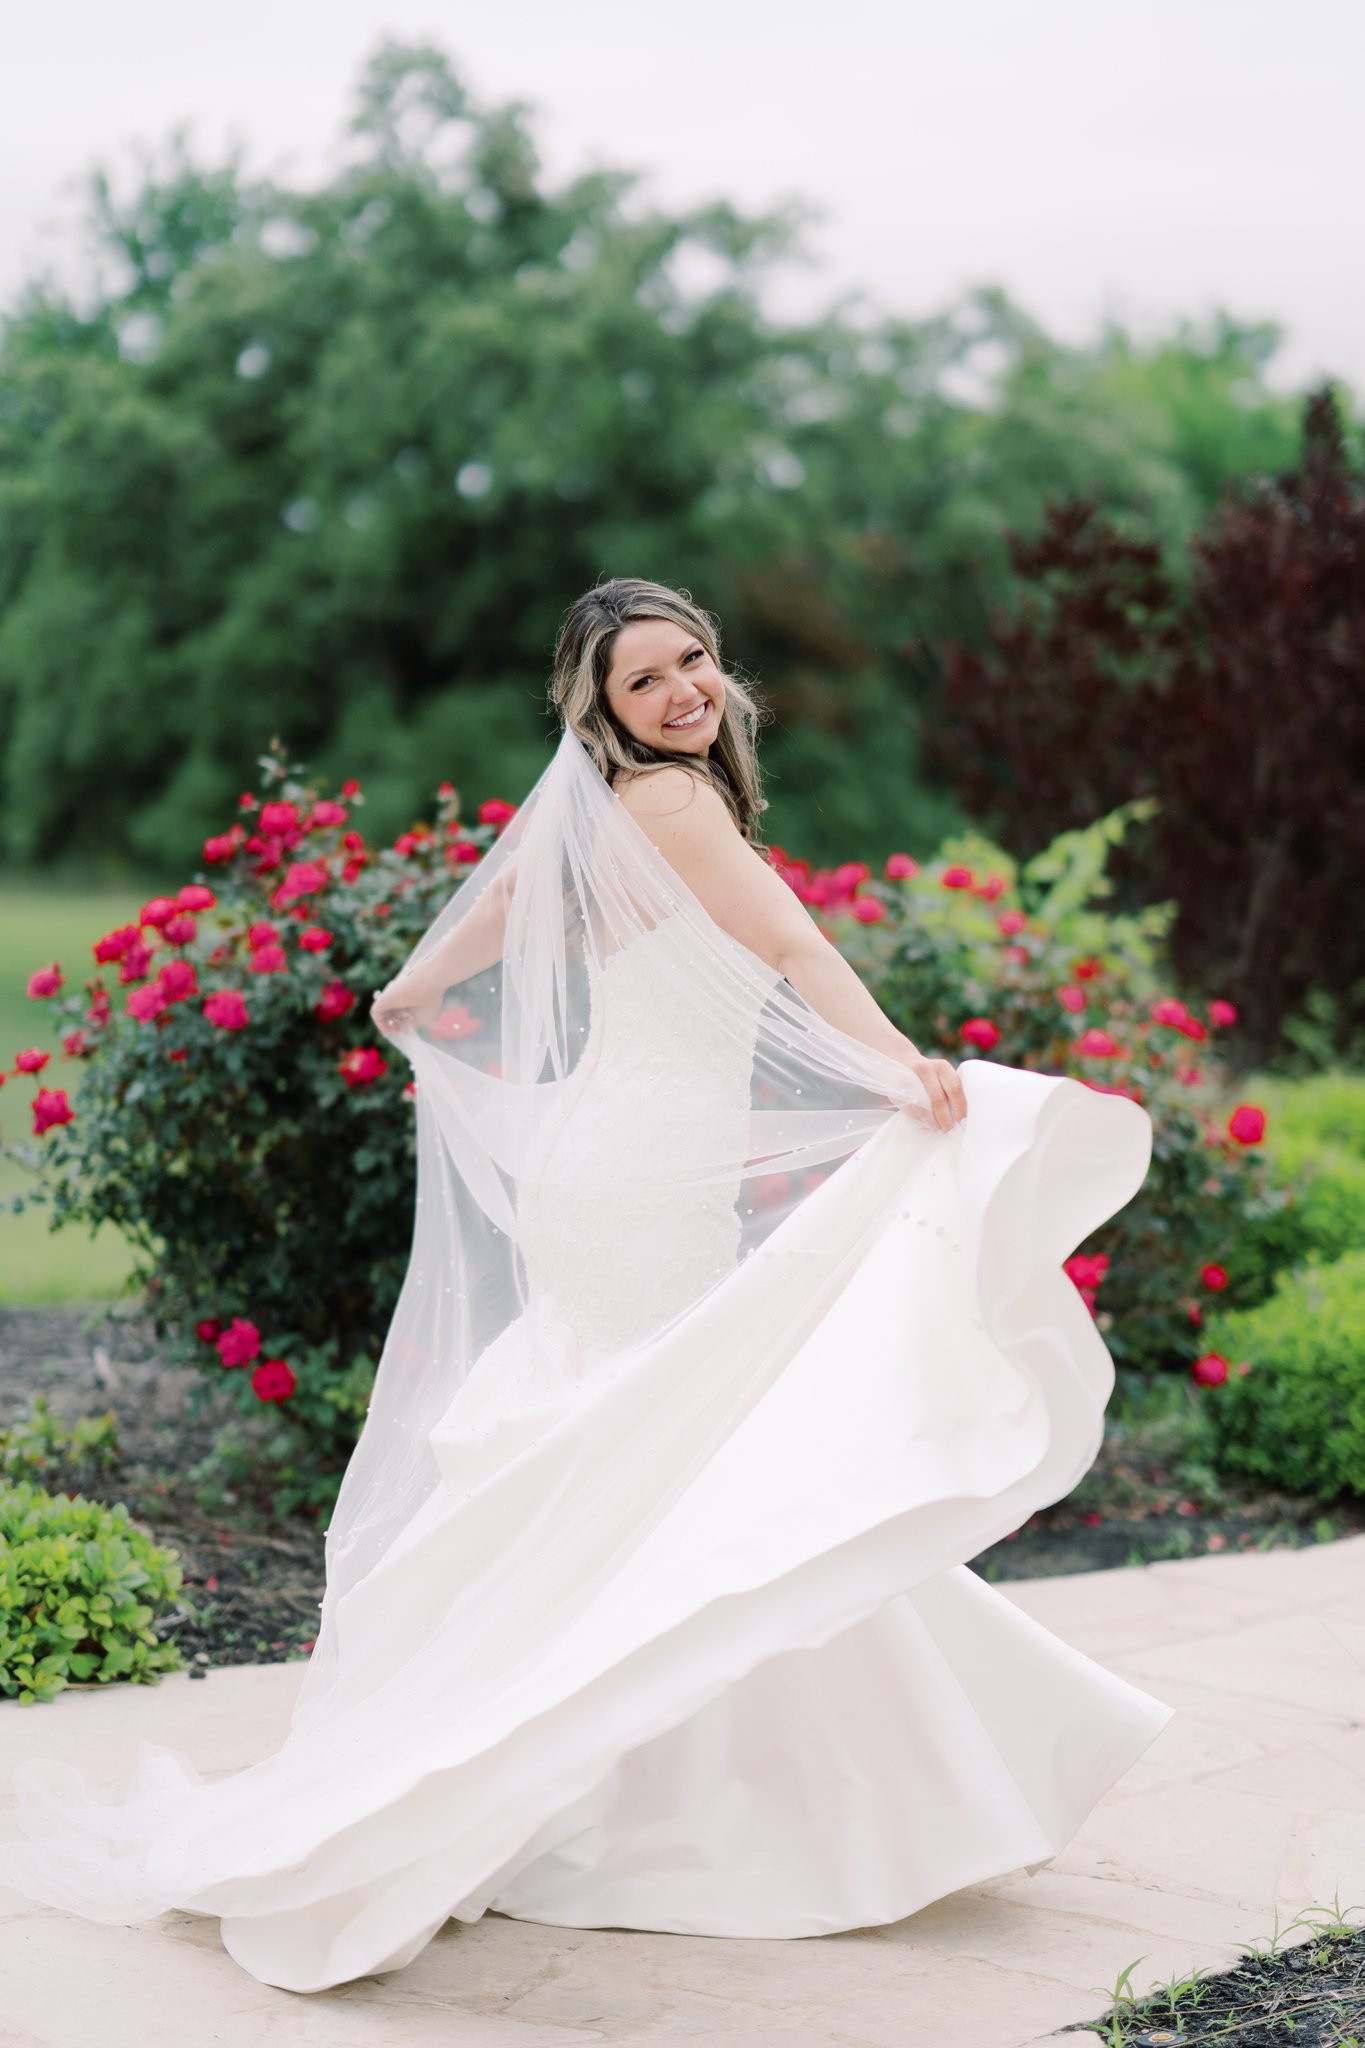 Amelia-Bridals-Holly-Marie-Photography-30.jpg